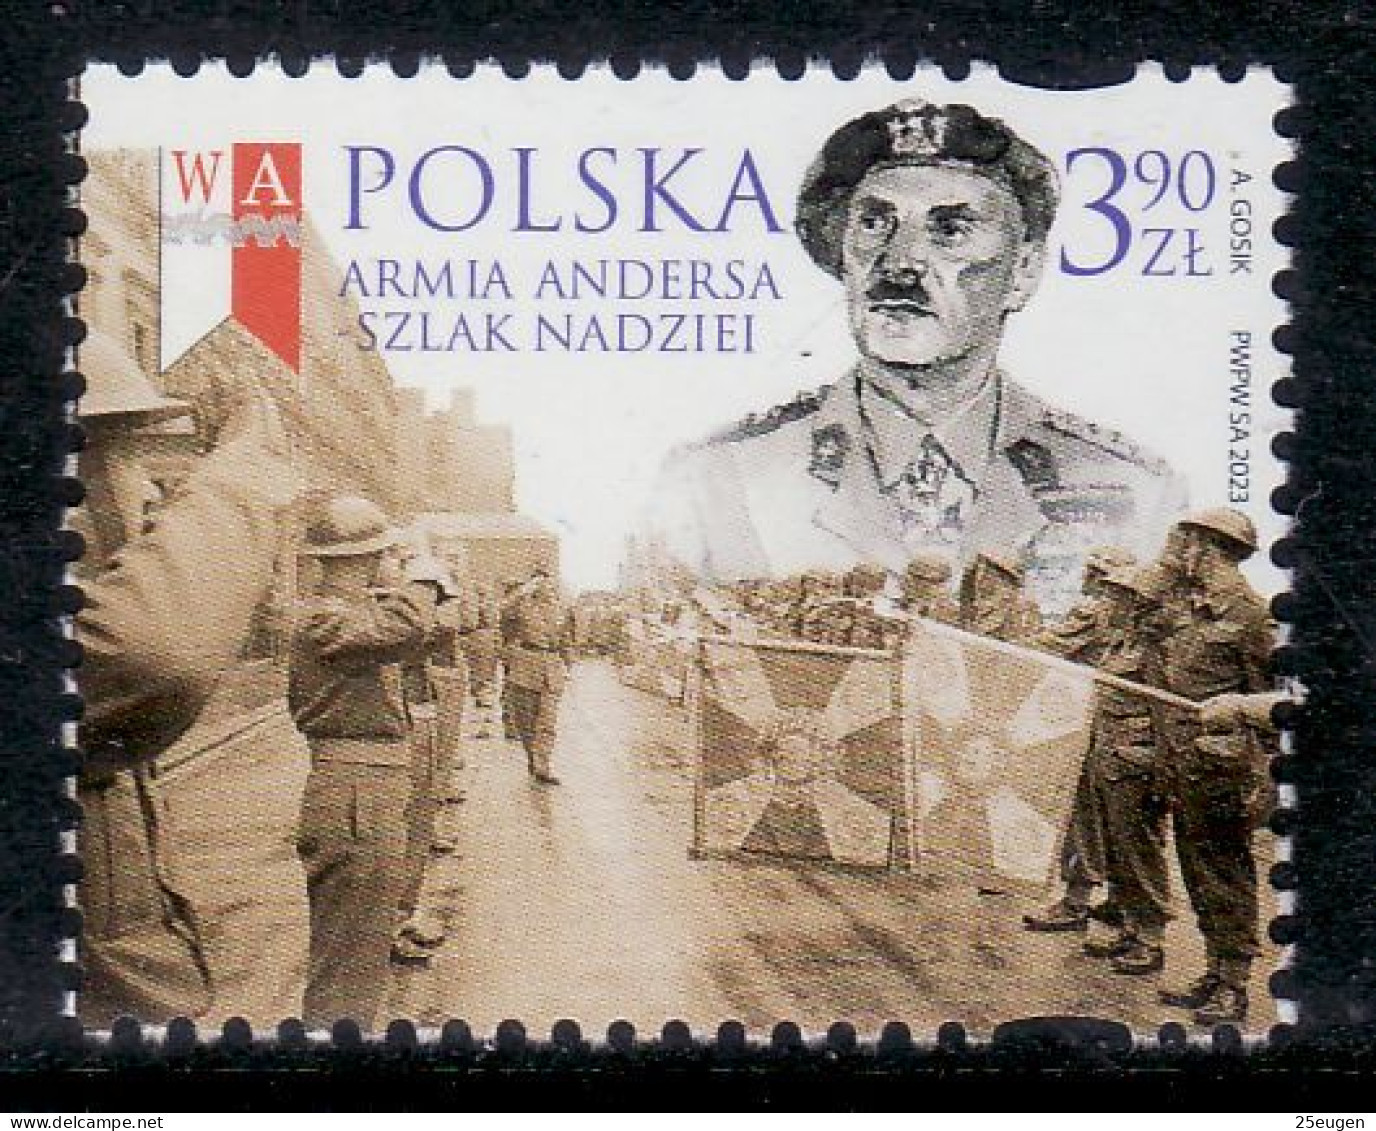 POLAND 2023  GENERAL W.ANDERS MNH - Nuovi